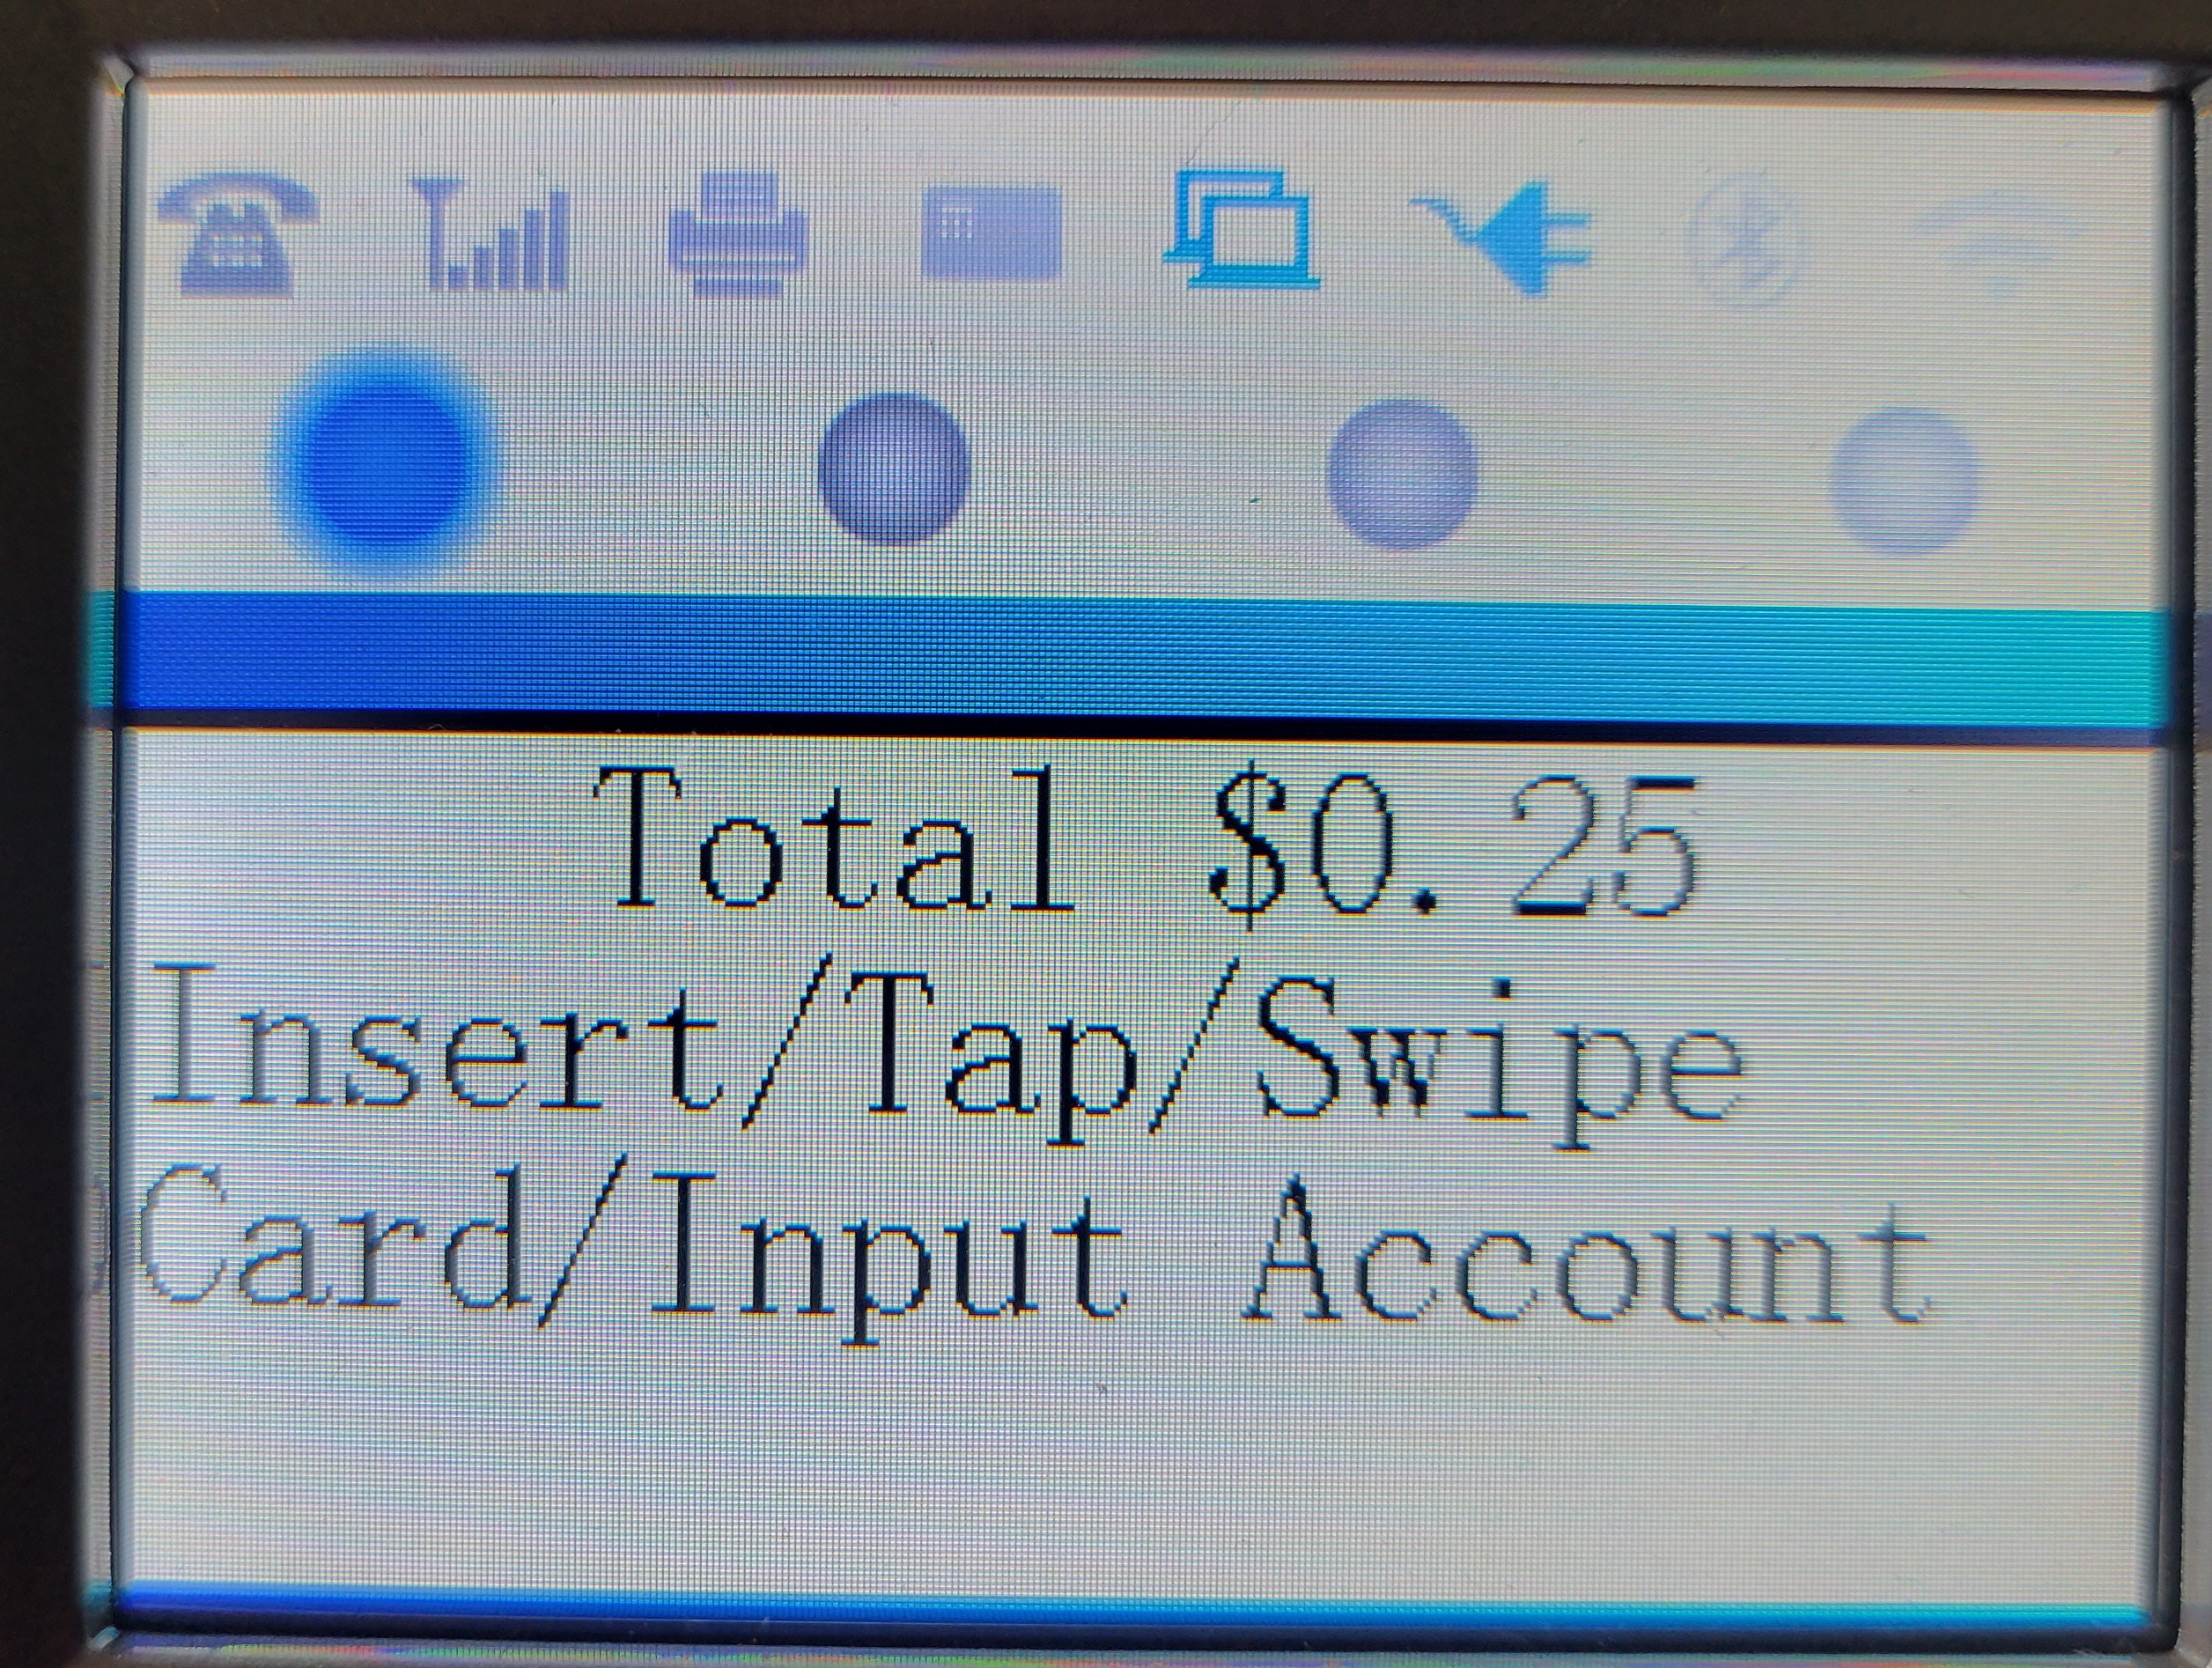 A screenshot of the PAX S500 main payment screen showing EMV capability enabled